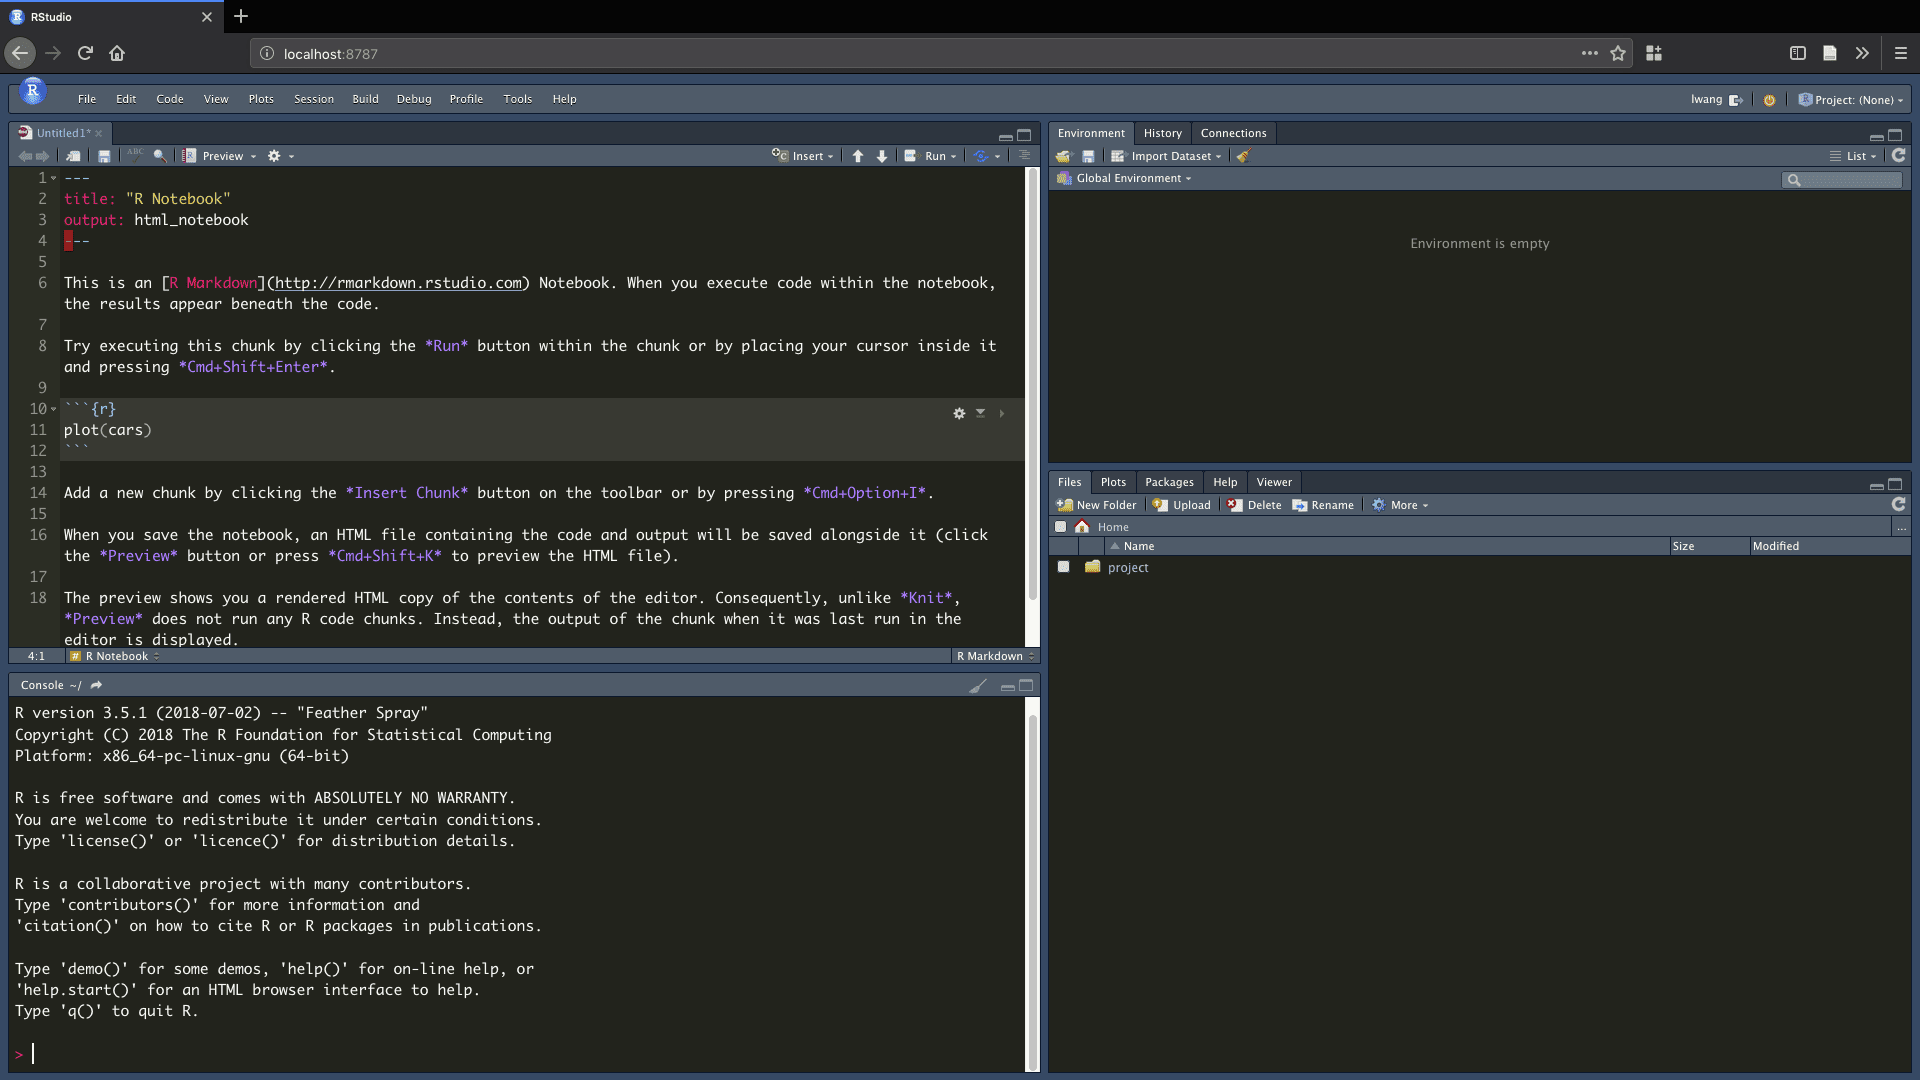 css - Texts without sub-pixel rendering in Firefox and its variants  (Librewolf, Tor, etc) look blurry in LCD monitors - Super User